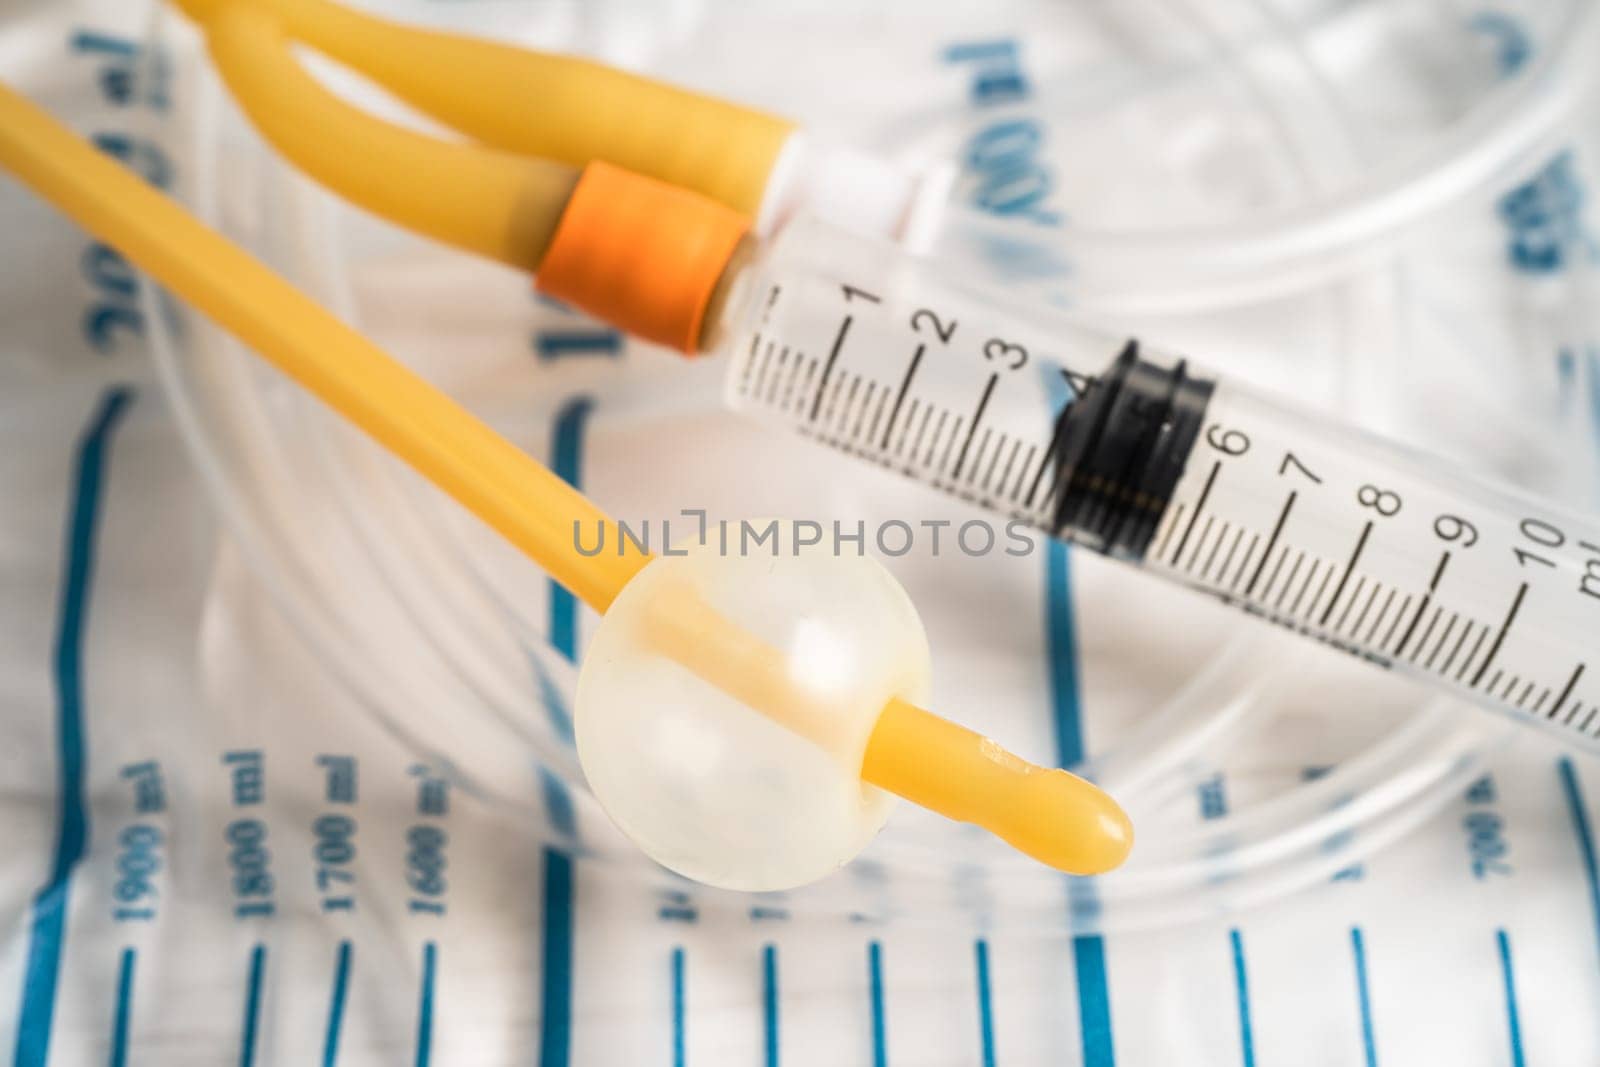 Foley urinary catheter with urine bag for disability or patient in hospital. by pamai